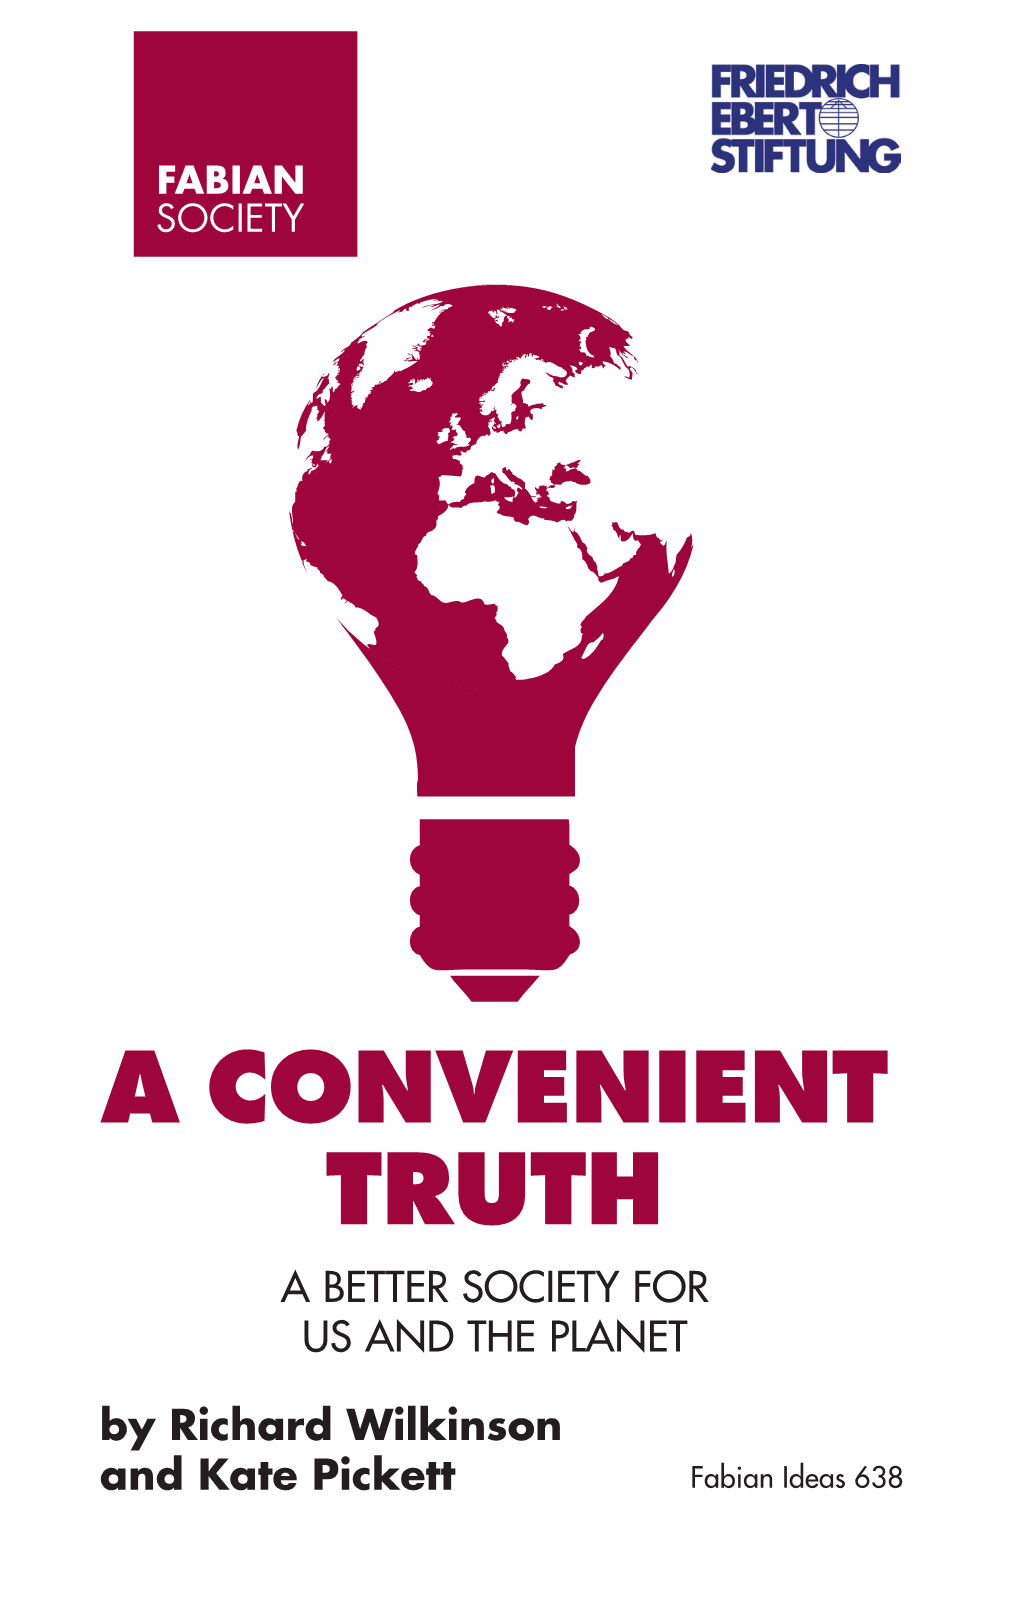 A CONVENIENT TRUTH a BETTER SOCIETY for US and the PLANET by Richard Wilkinson and Kate Pickett Fabian Ideas 638